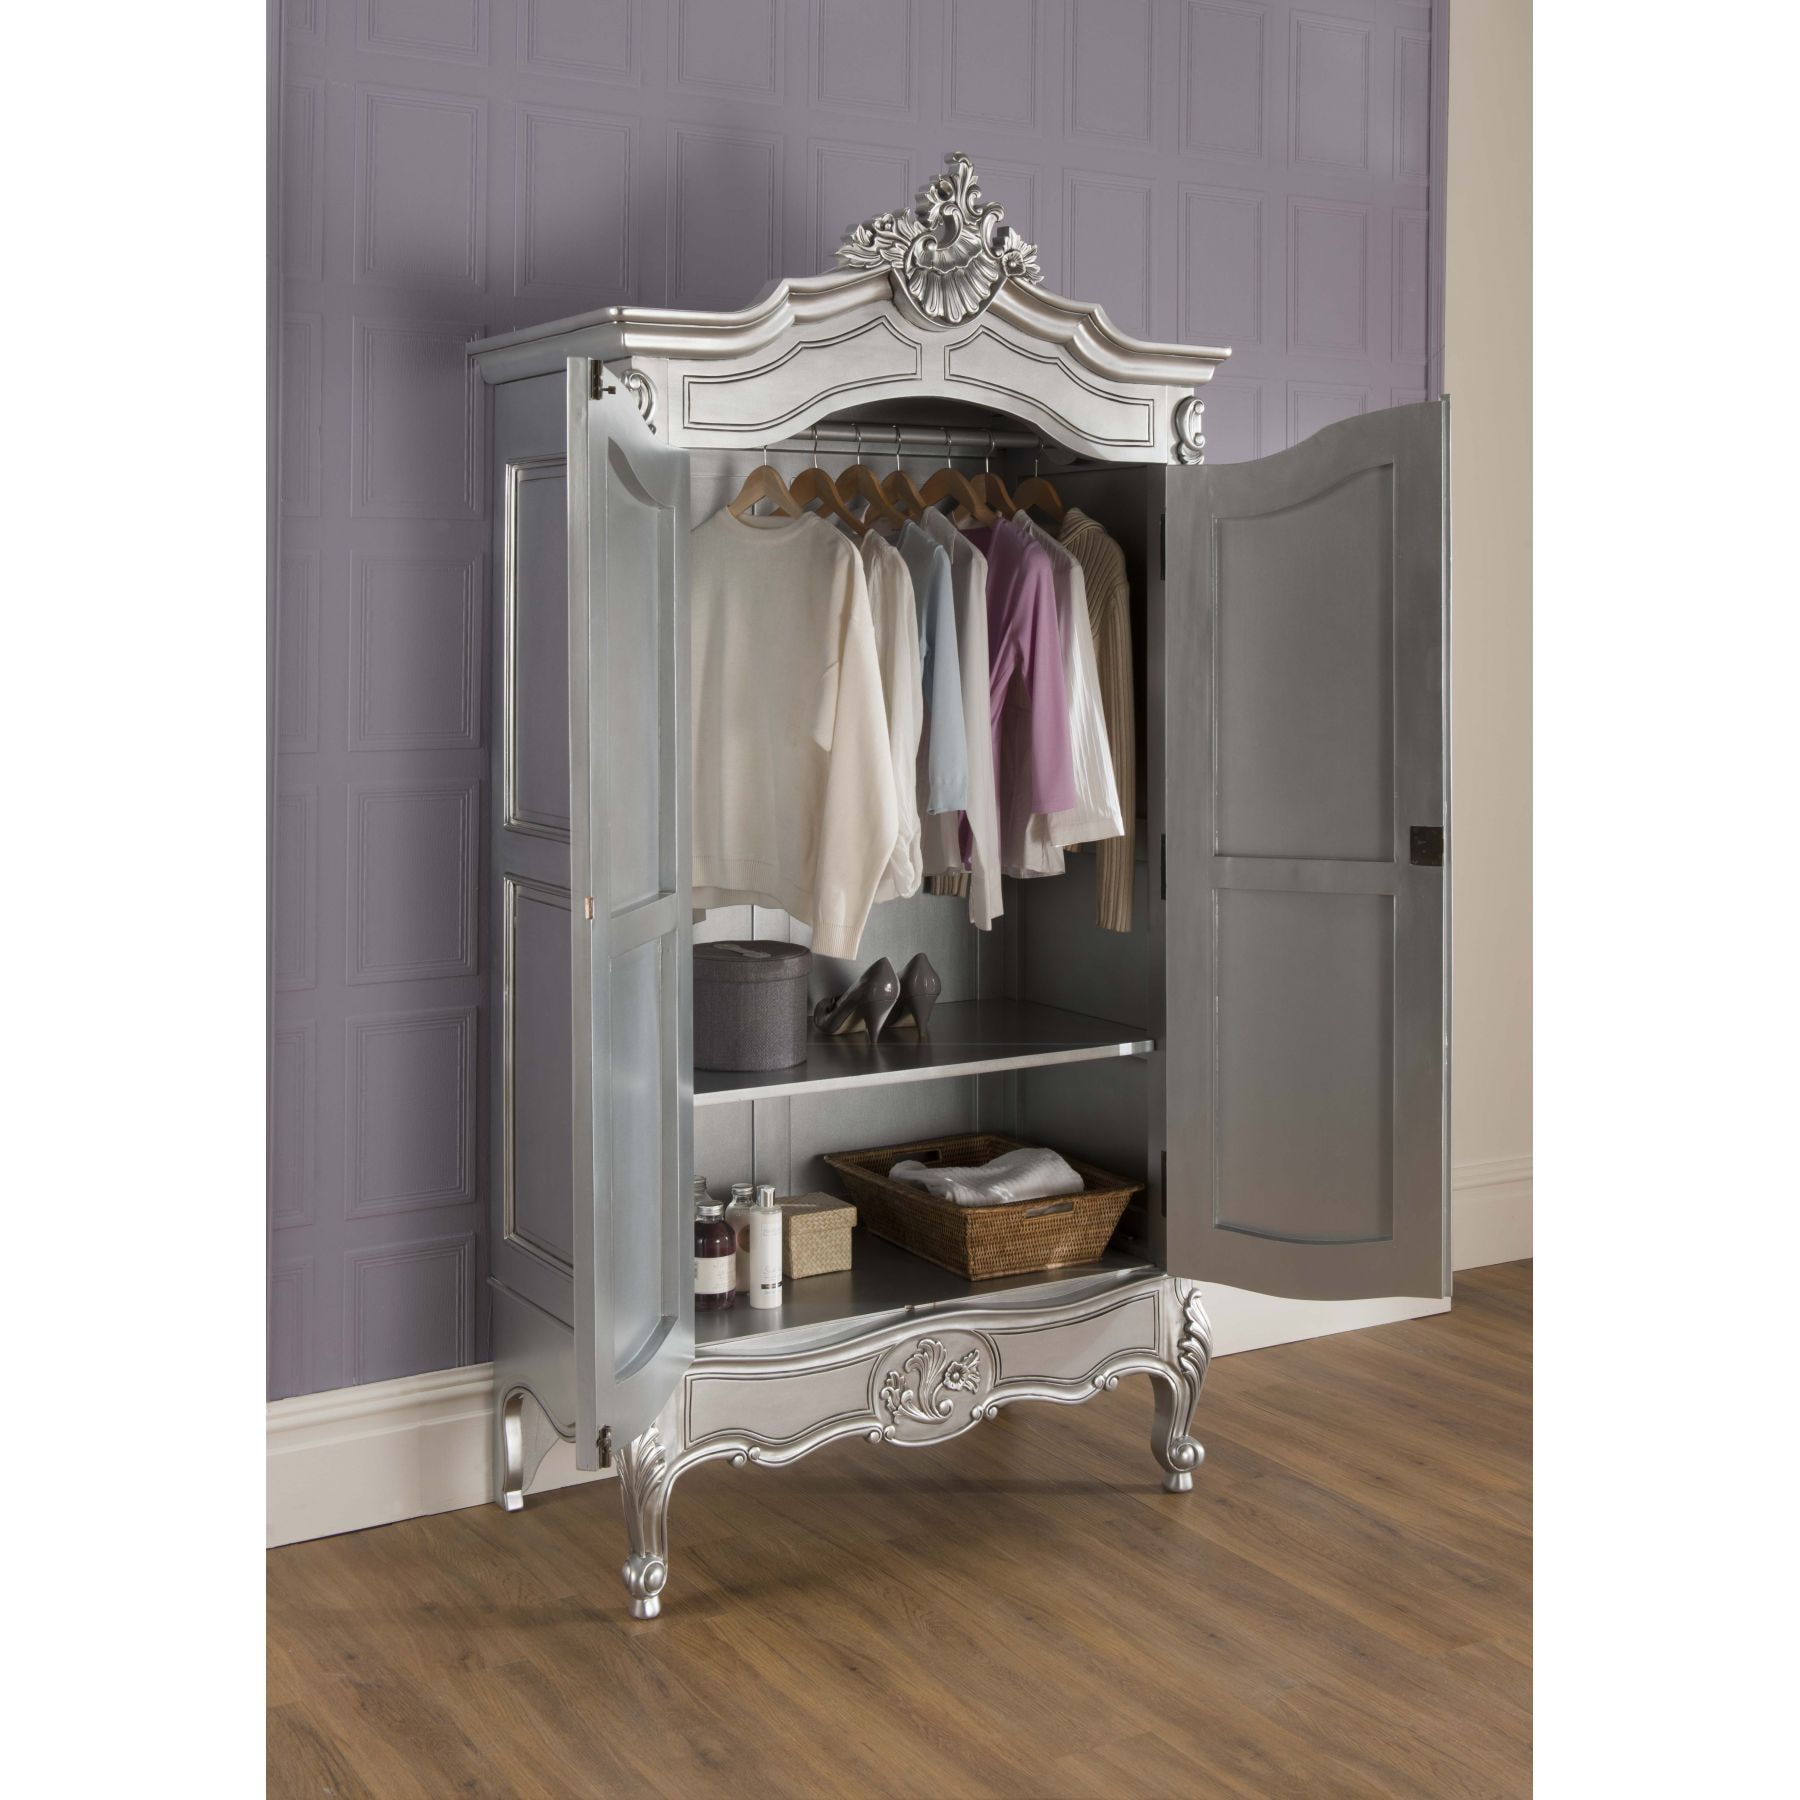 La Rochelle Antique French Wardrobe Works Exceptional Alongside Our Shabby  Chic Furniture Intended For Silver French Wardrobes (View 15 of 15)